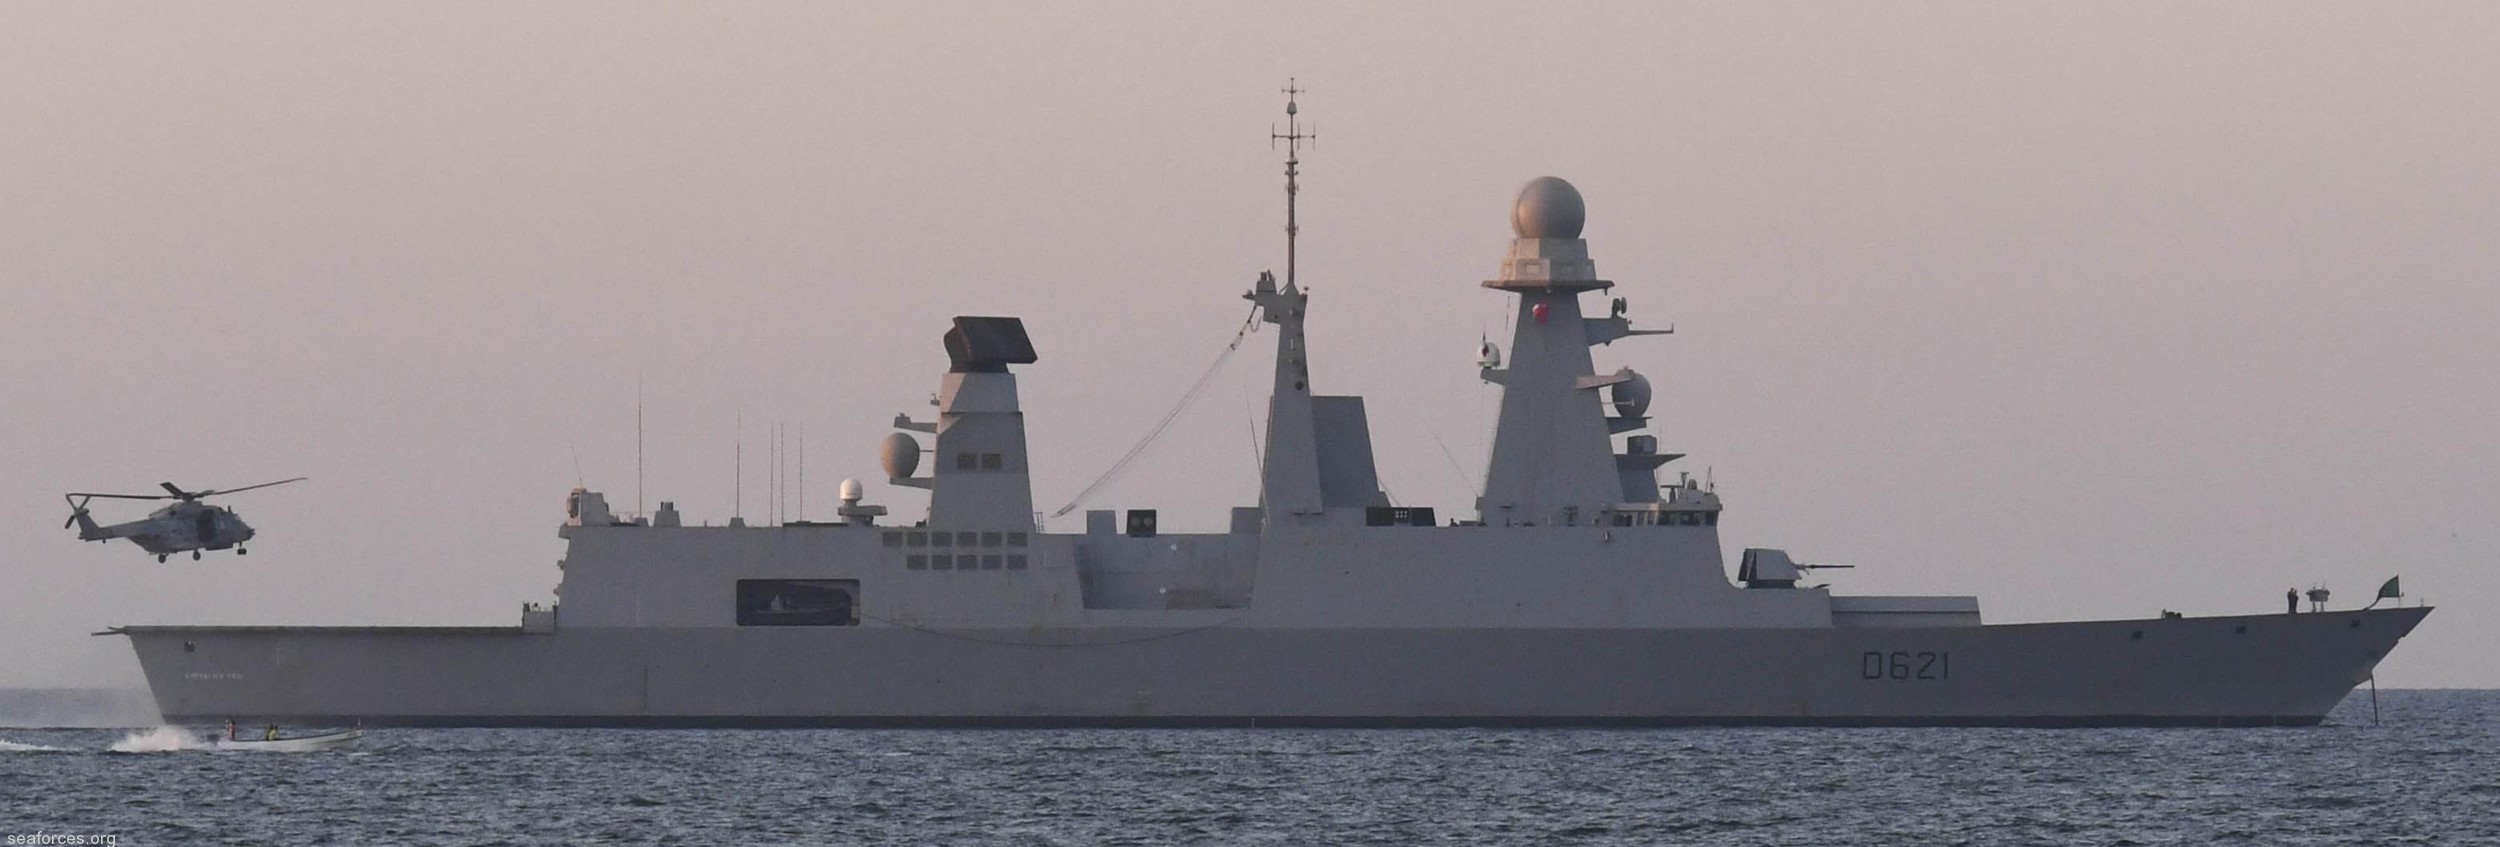 d-621 fs chevalier paul forbin horizon class guided missile frigate anti-air-warfare aaw ffgh french navy marine nationale 11 nato